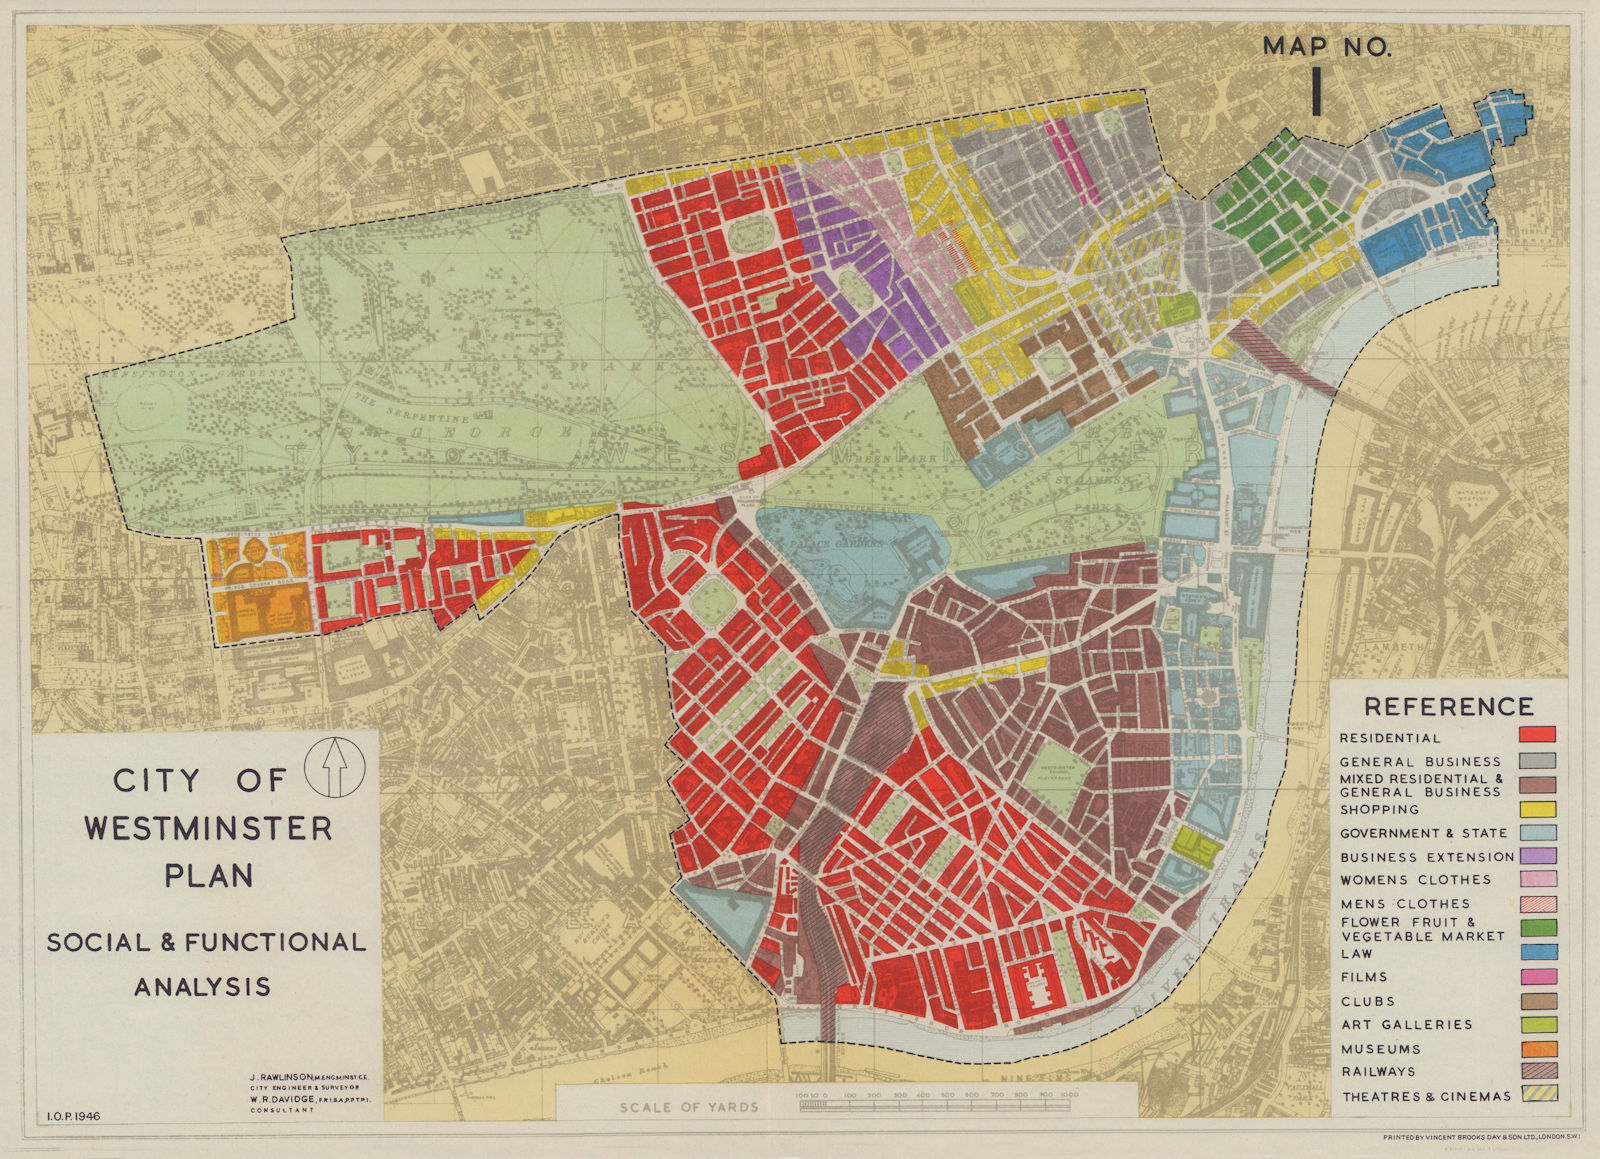 City of Westminster plan. Social & Functional Analysis. RAWLINSON 1946 old map